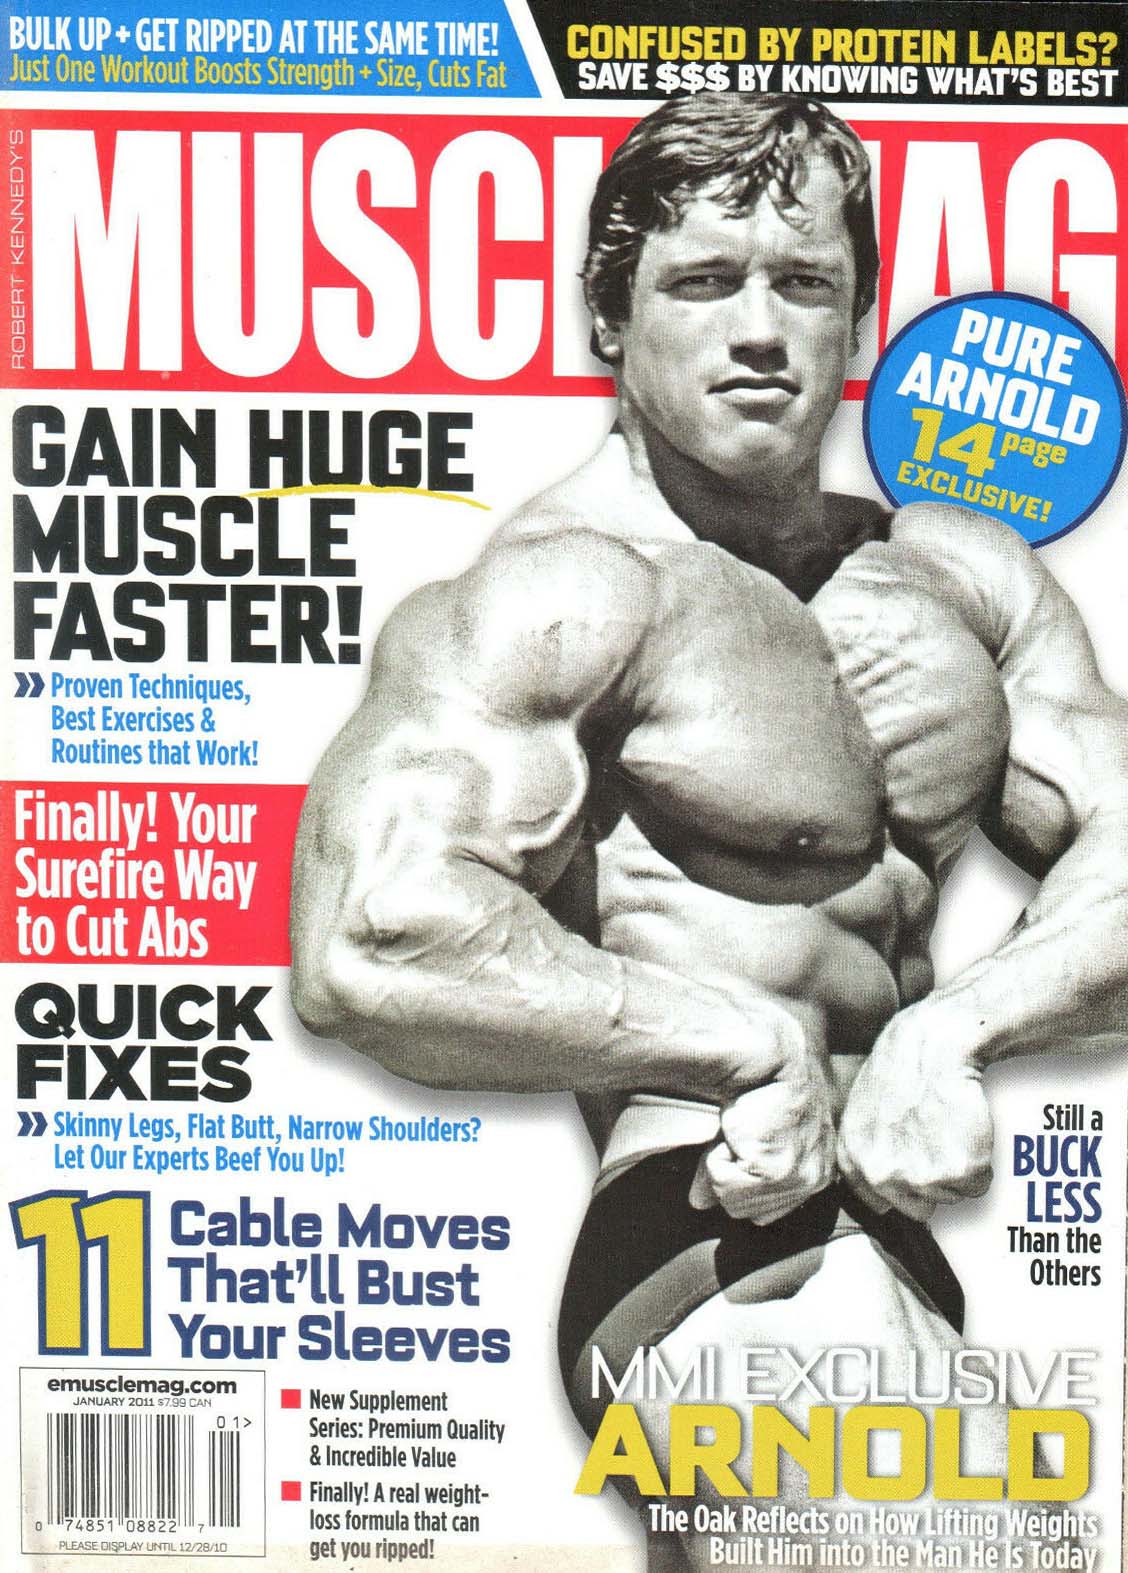 Muscle Mag January 2011 magazine back issue Muscle Mag magizine back copy Muscle Mag January 2011 Bodybuilding and Fitness Magazine Back Issue Published by Canadian Robert Kennedy and Founded in 1974. Bulk Up + Get Ripped At The Same Time! Just One Workout Boosts Strength + Size, Cuts Fat.